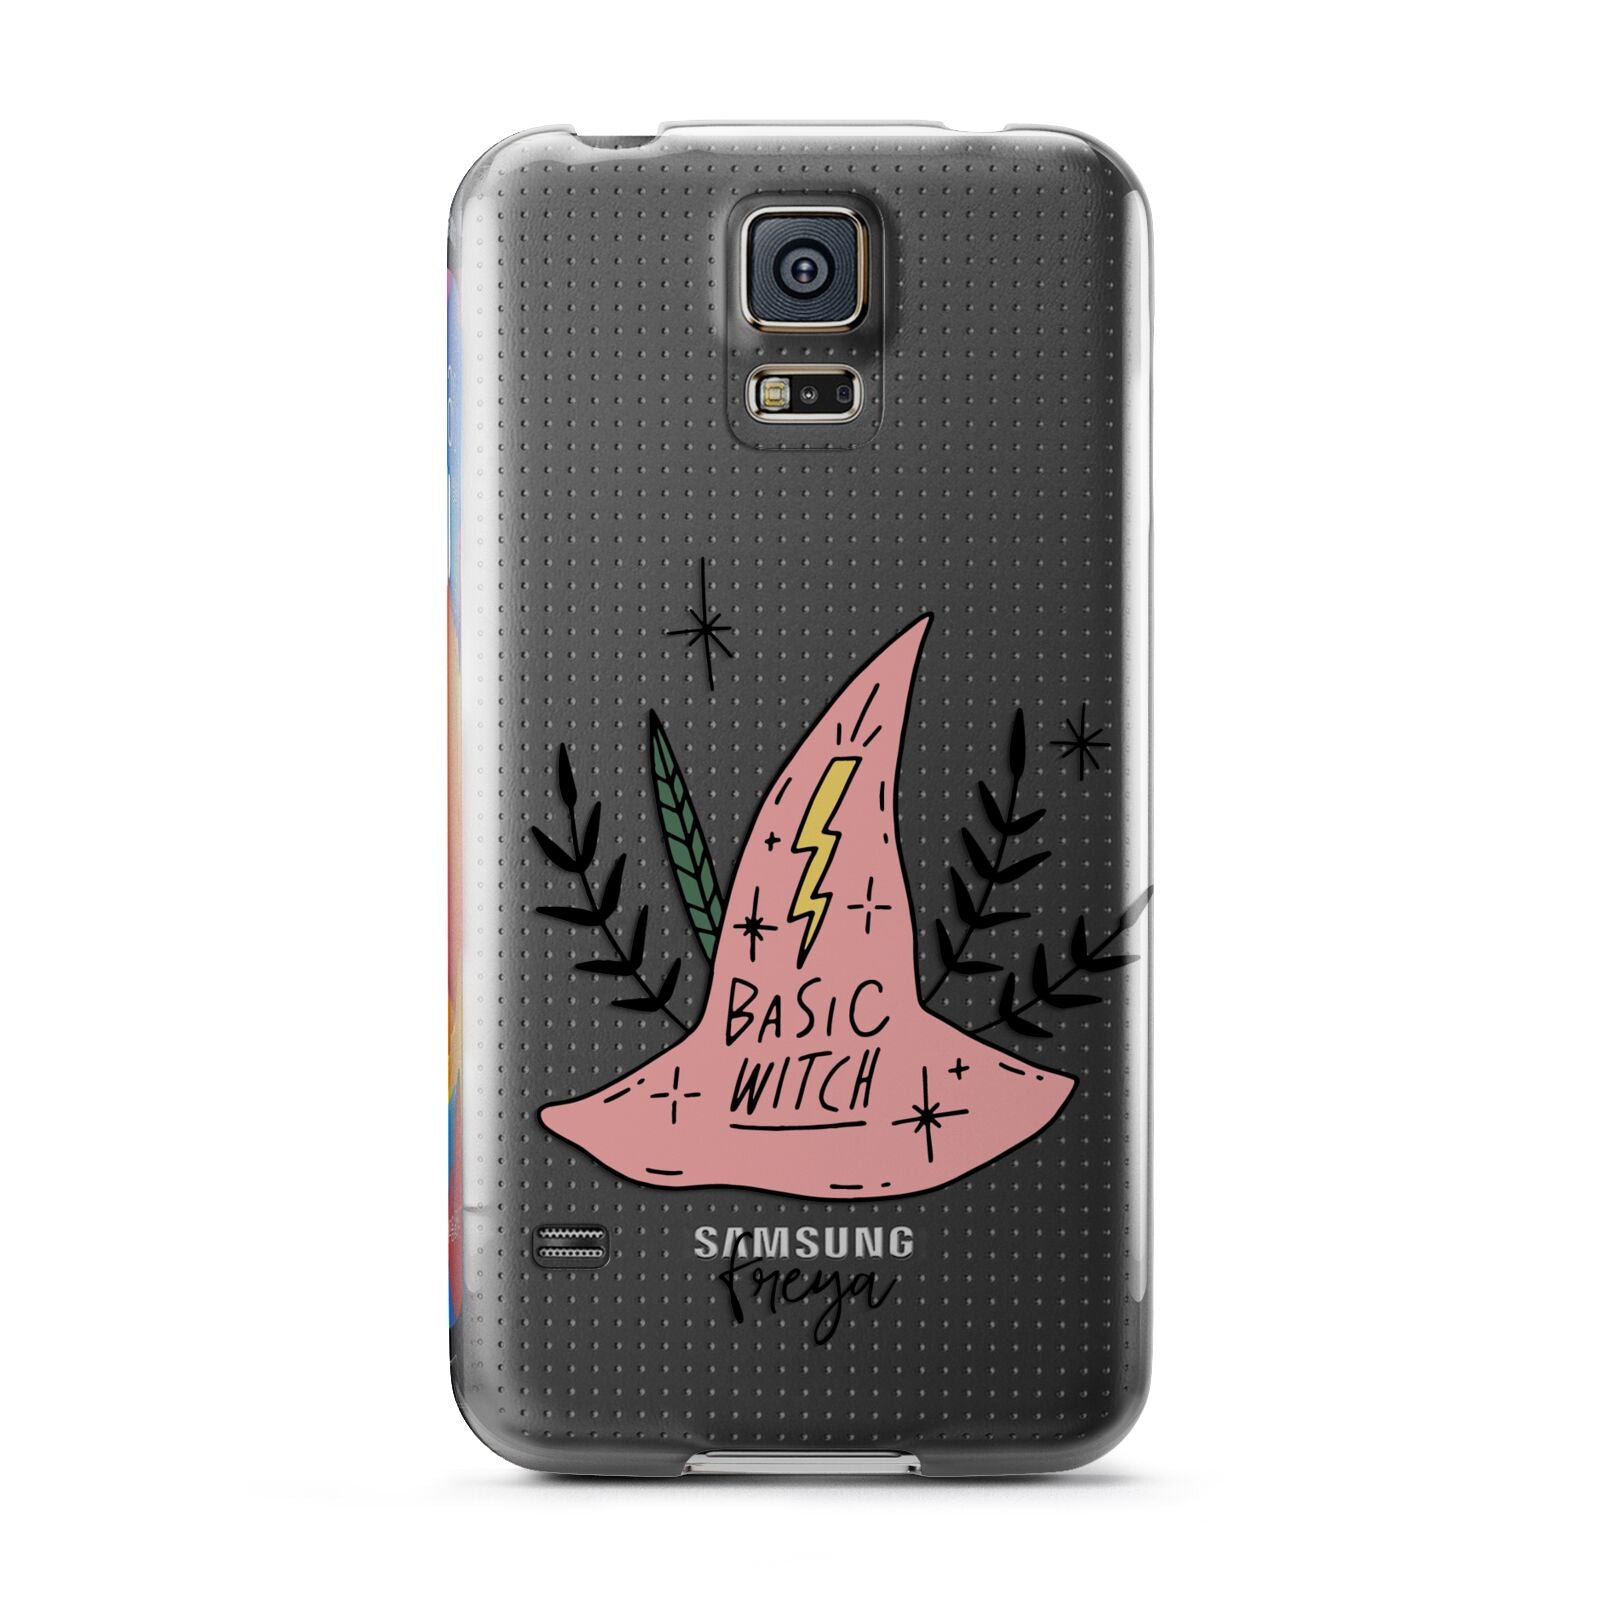 Basic Witch Hat Personalised Samsung Galaxy S5 Case